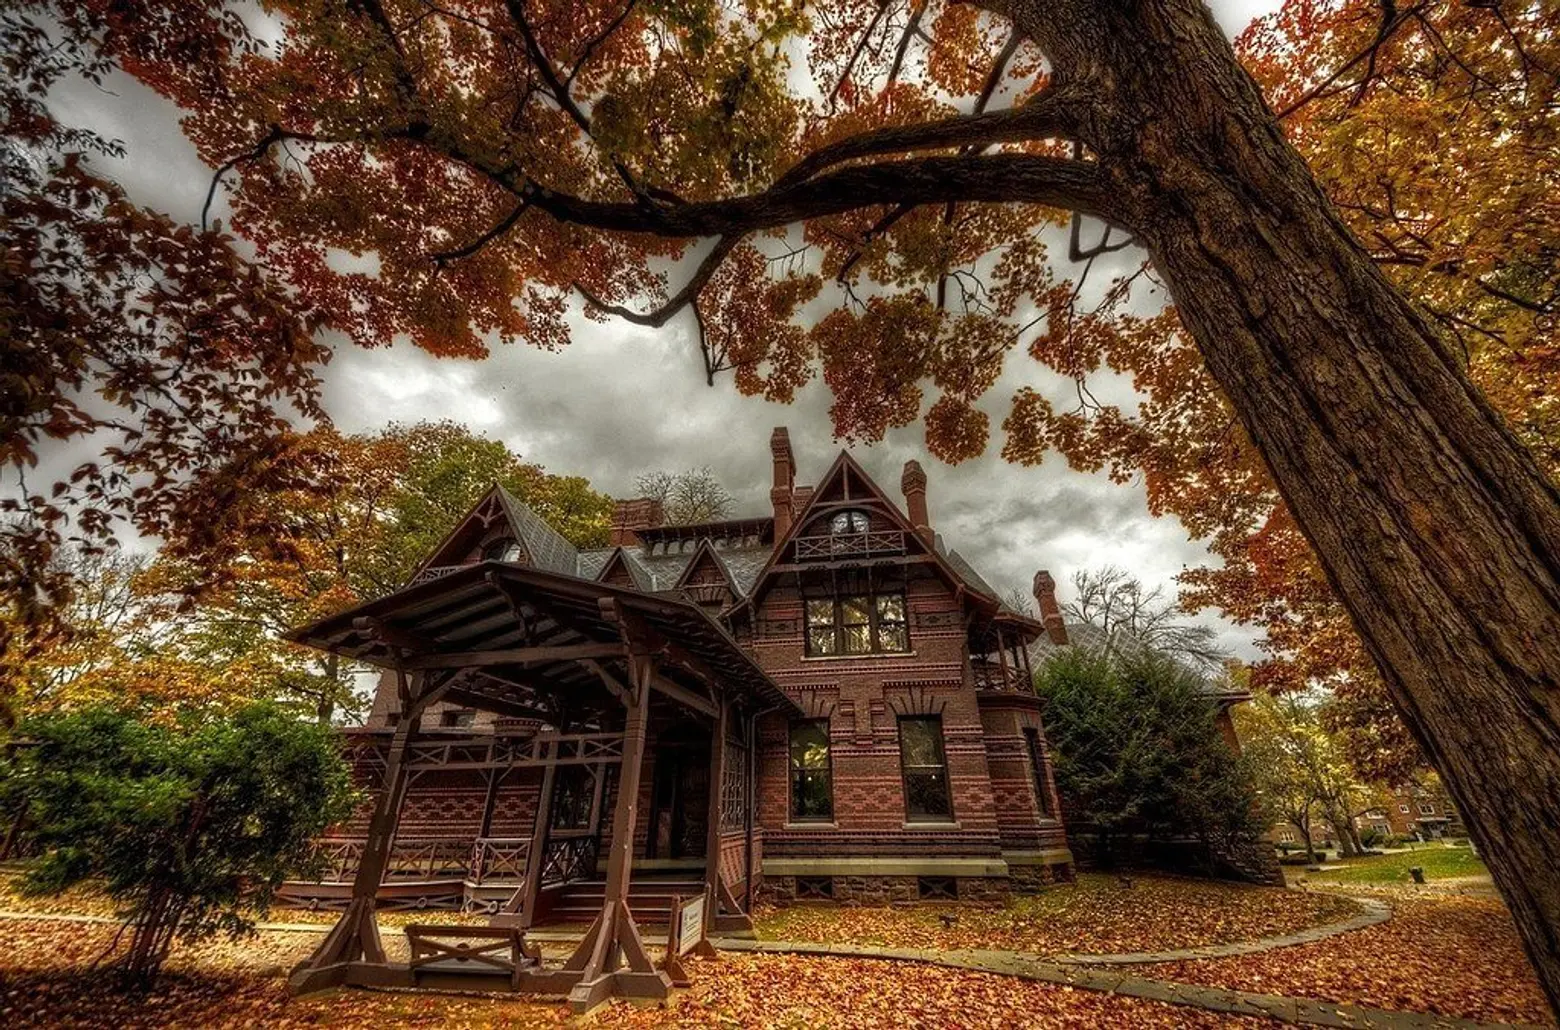 Go ghost hunting at Mark Twain’s haunted and historic Connecticut manor